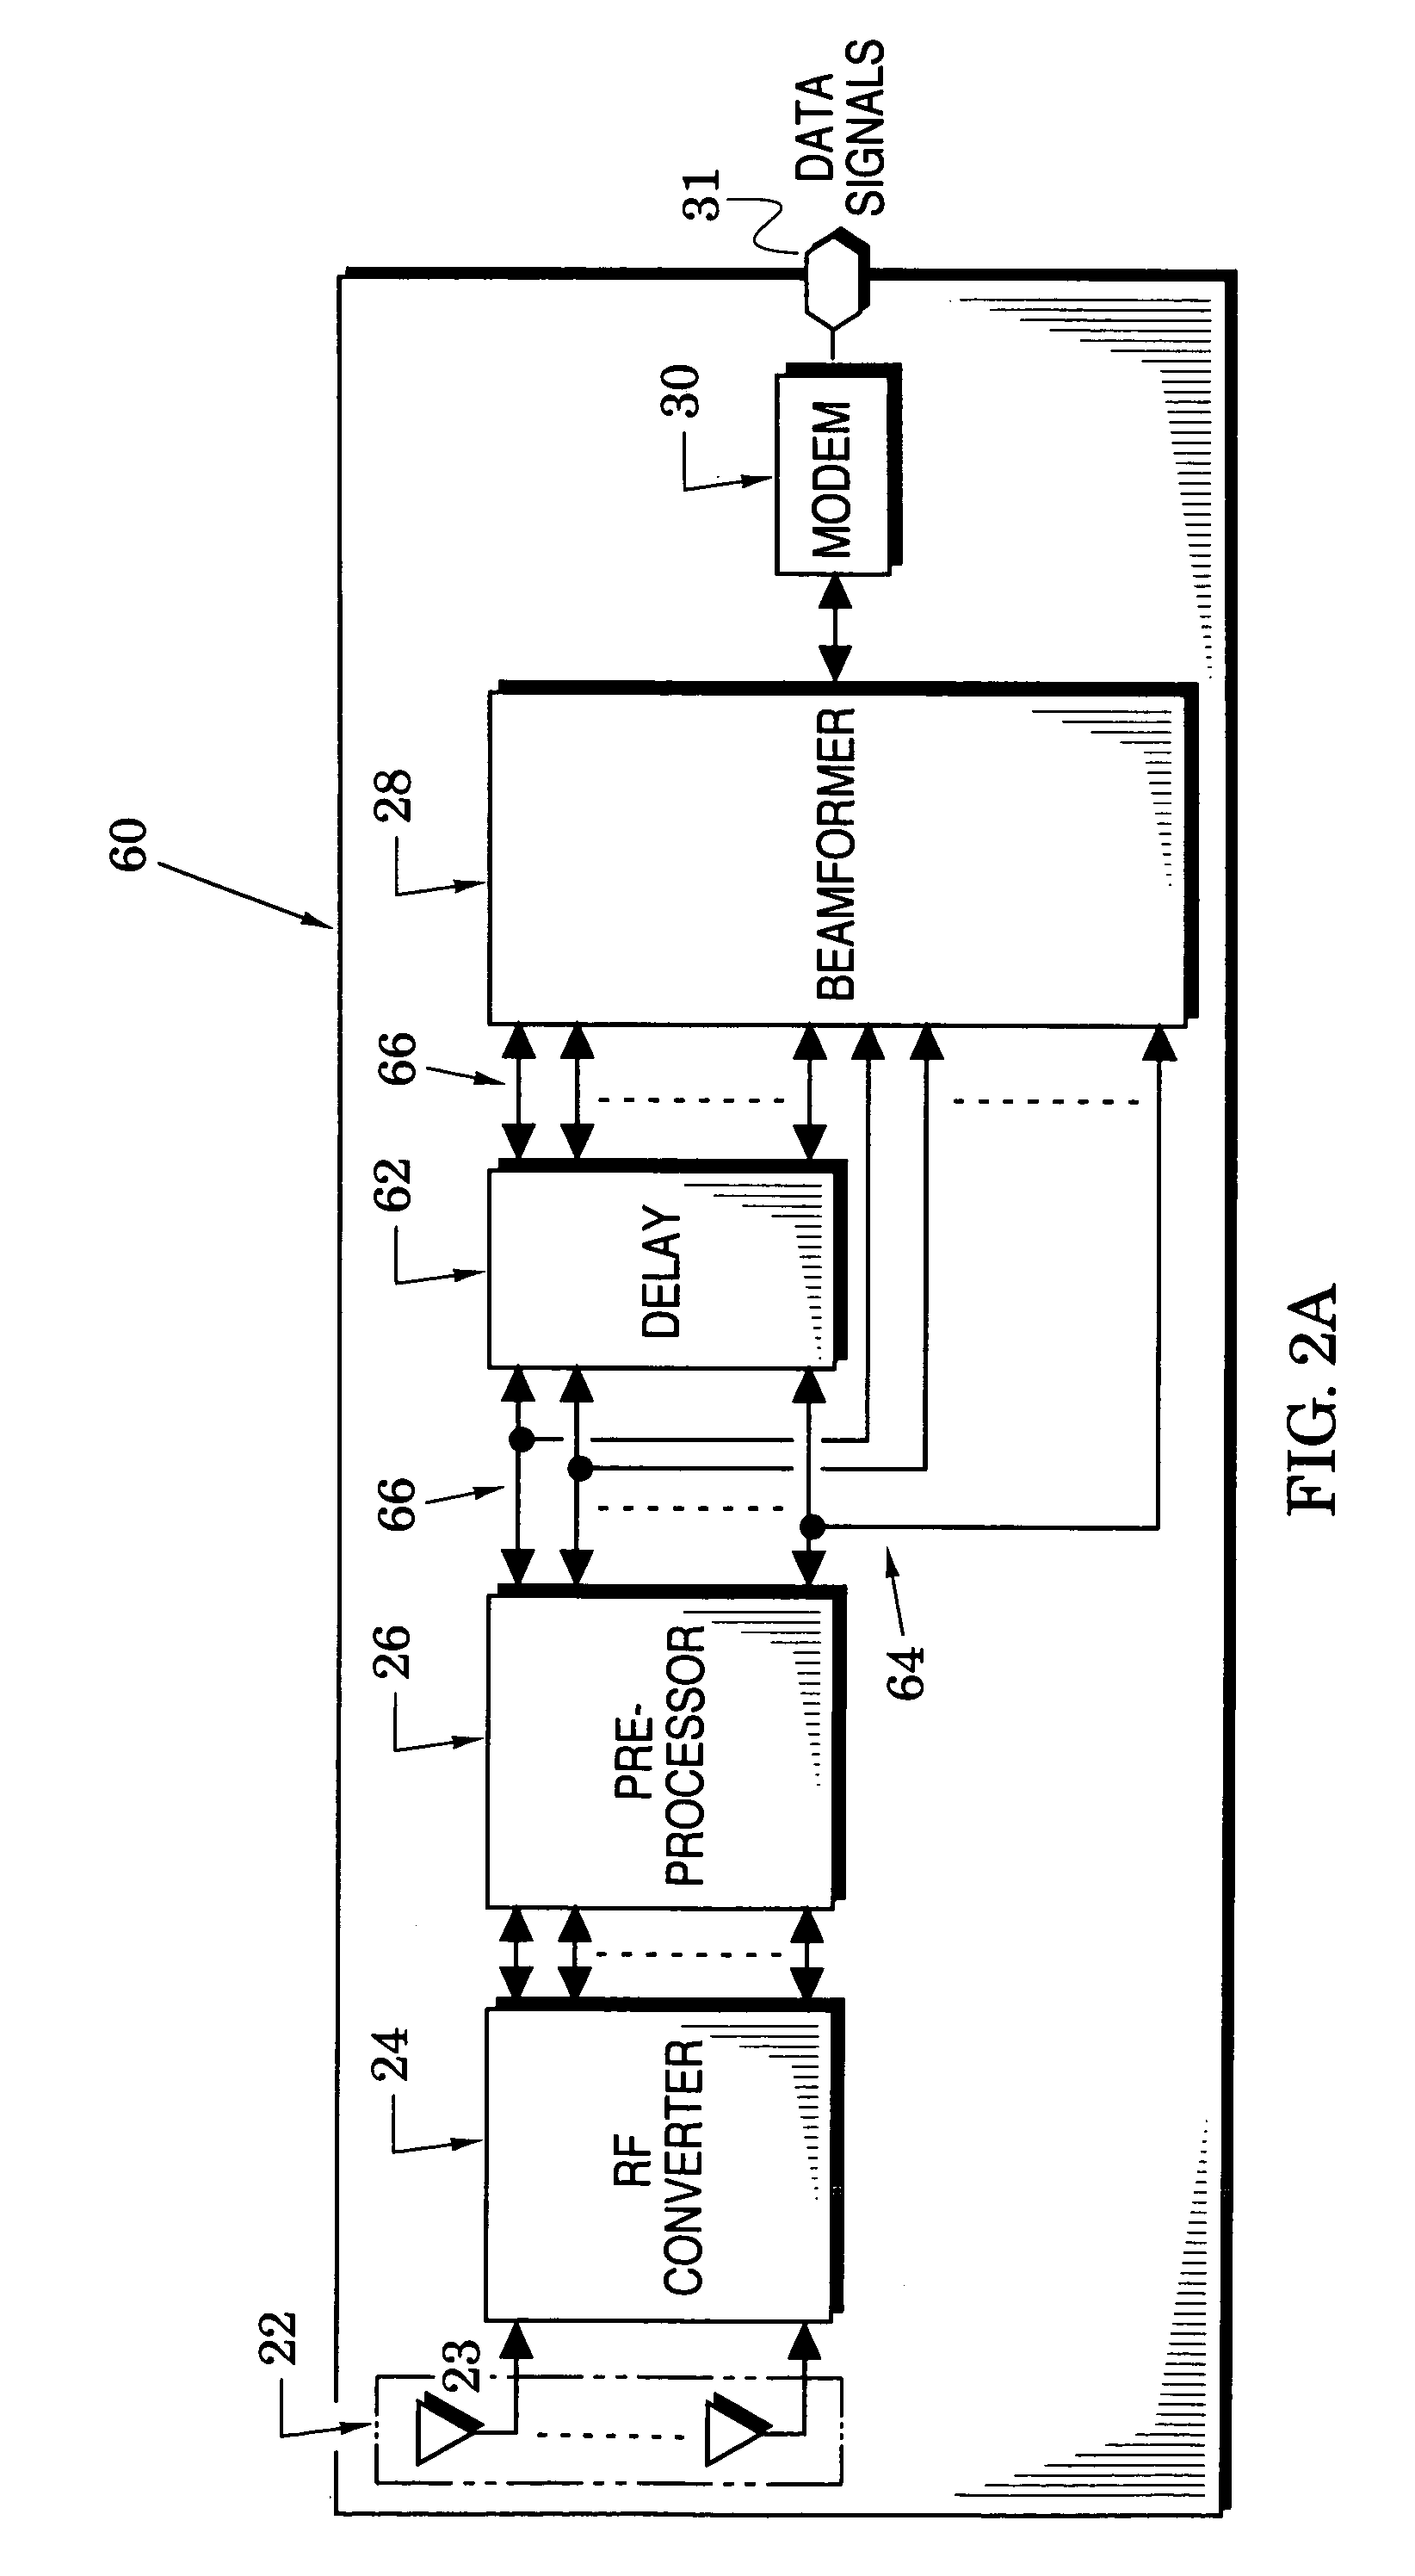 Adaptive beamforming methods and systems that enhance performance and reduce computations